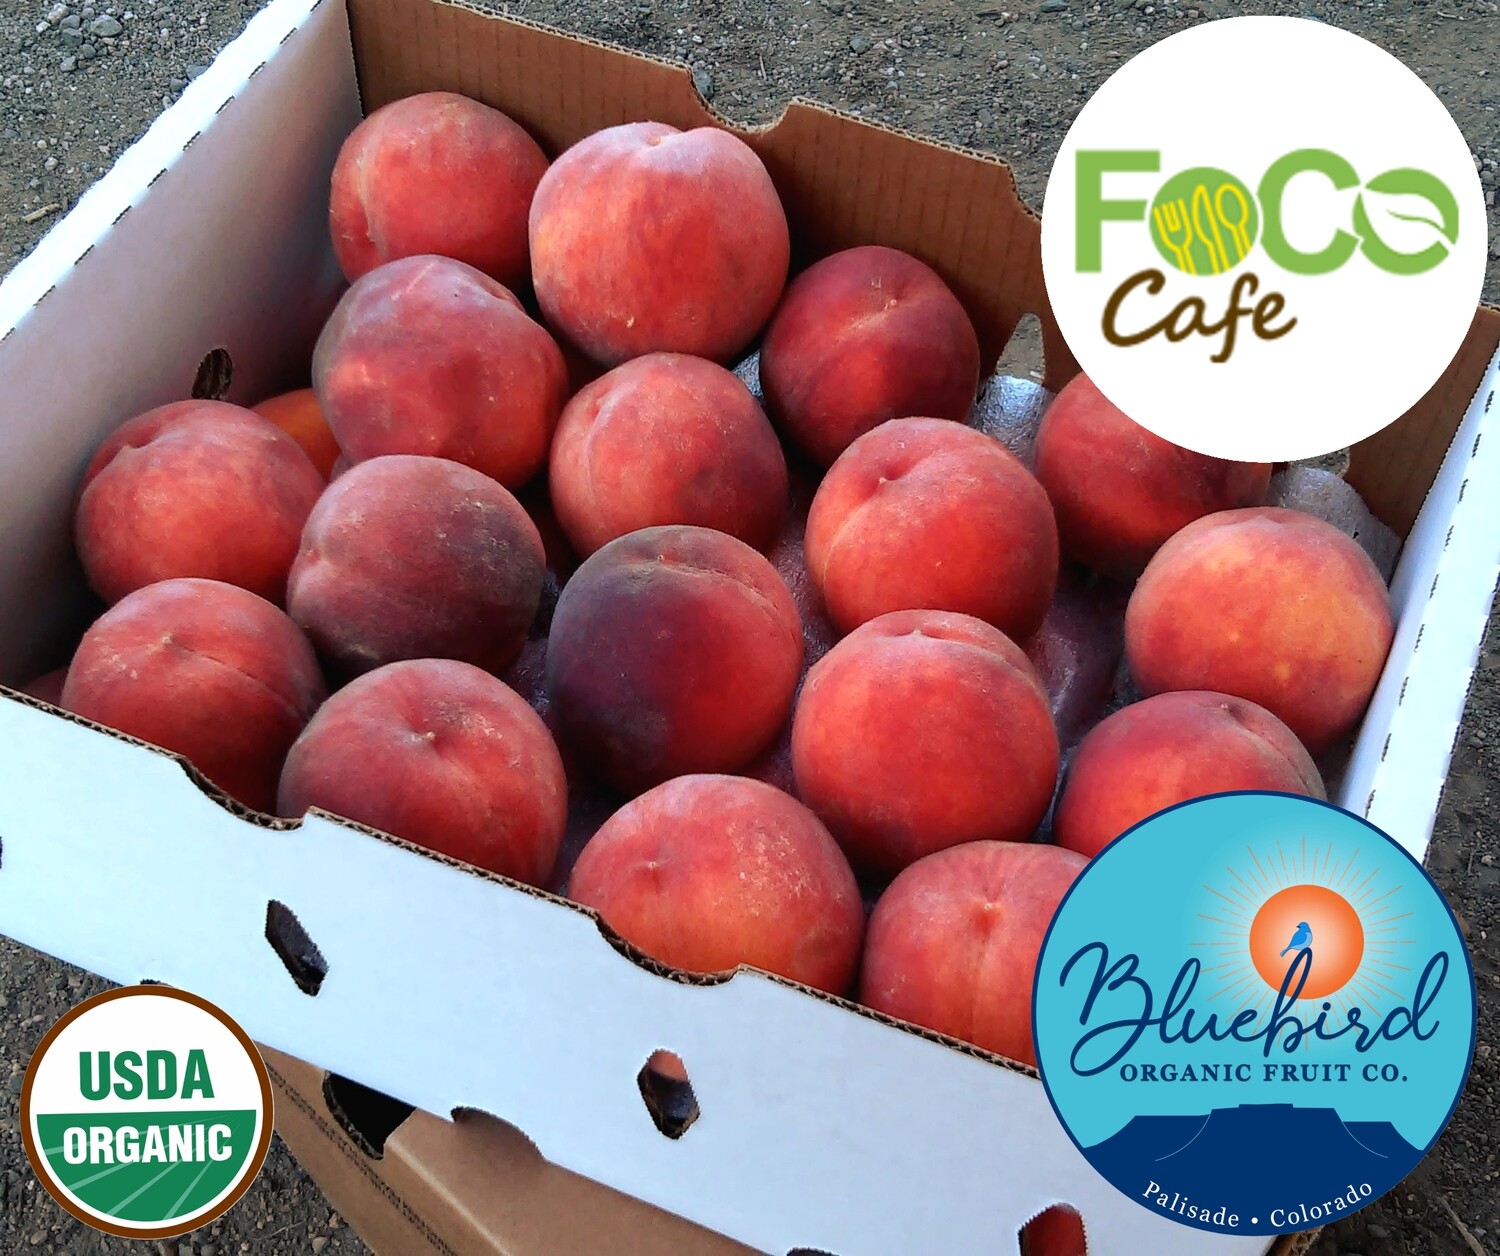 DONATE PEACHES TO FoCo Cafe: One Box of Organic Palisade Peaches